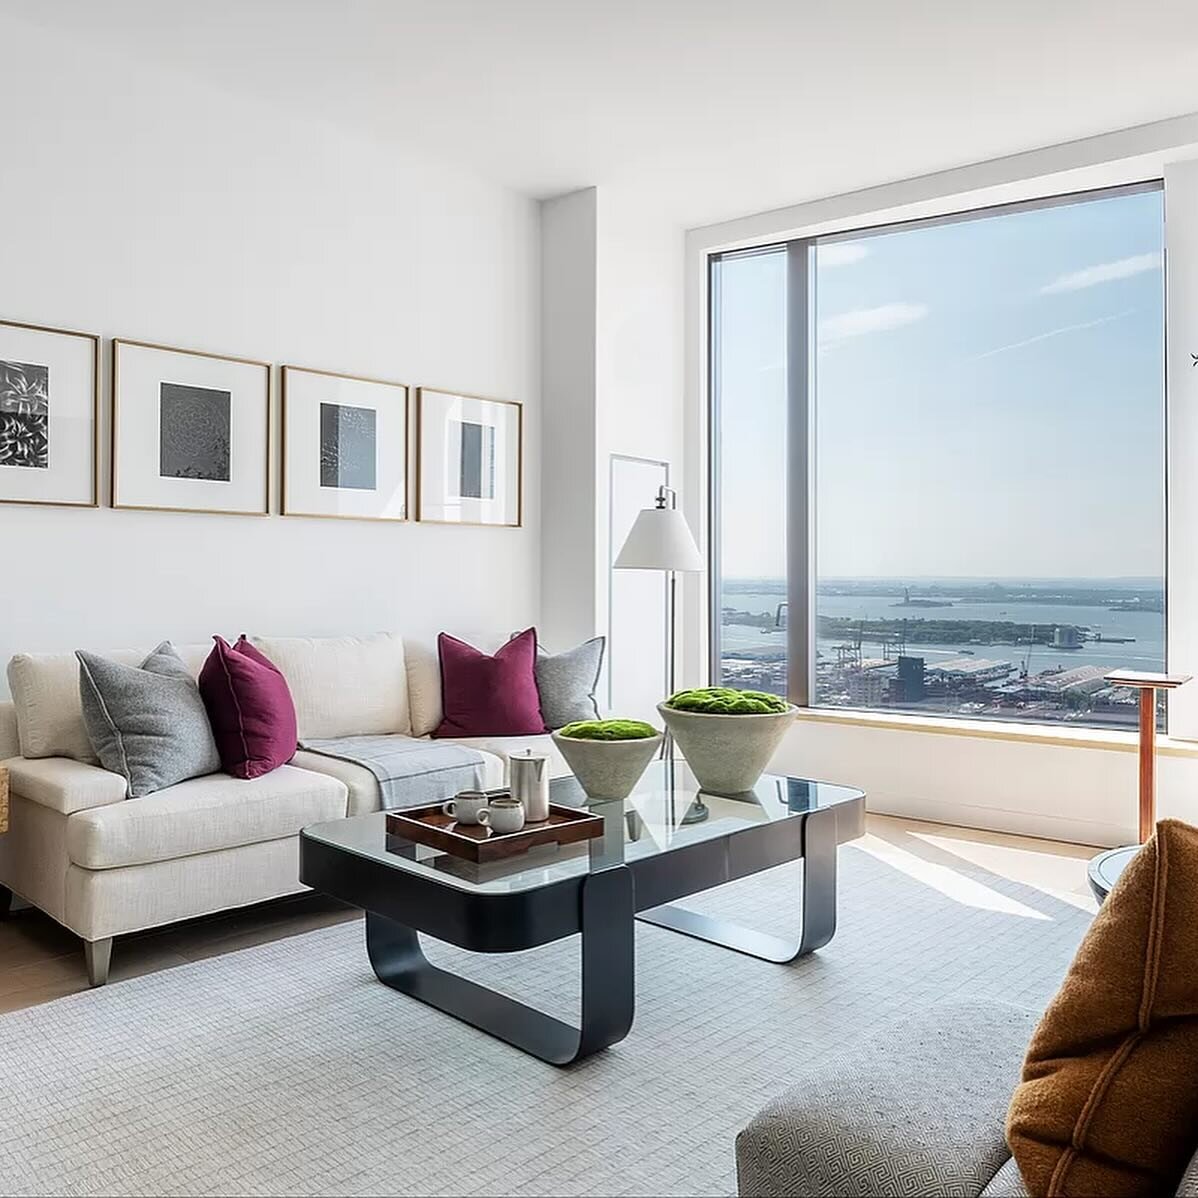 Contract Signed! My client just signed a contract at 11 Hoyt, a 57-story new development in Downtown Brooklyn offering more than 55,000 square feet of amenities.

11 Hoyt Street, #53K
&bull; 2 Bedrooms
&bull; 2 Bathrooms
&bull; Last Asking Price: $2,